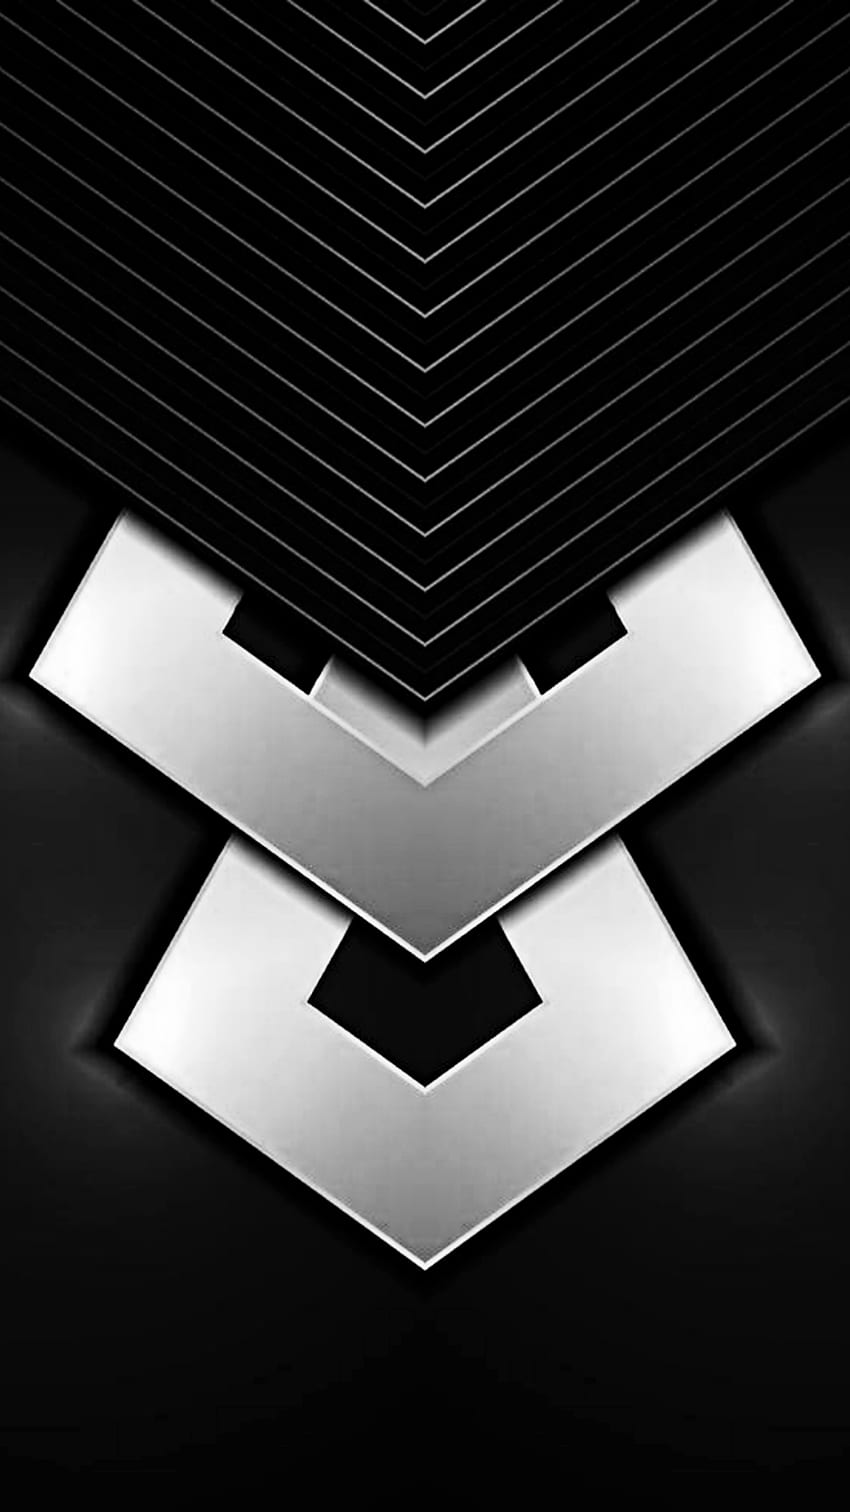 fsdfs, digital, tech, new, symbol, shadow, texture, black, pattern, abstract, monochrome graphy, triangles, material, future, shapes, design, layers, silver, overlayed HD phone wallpaper